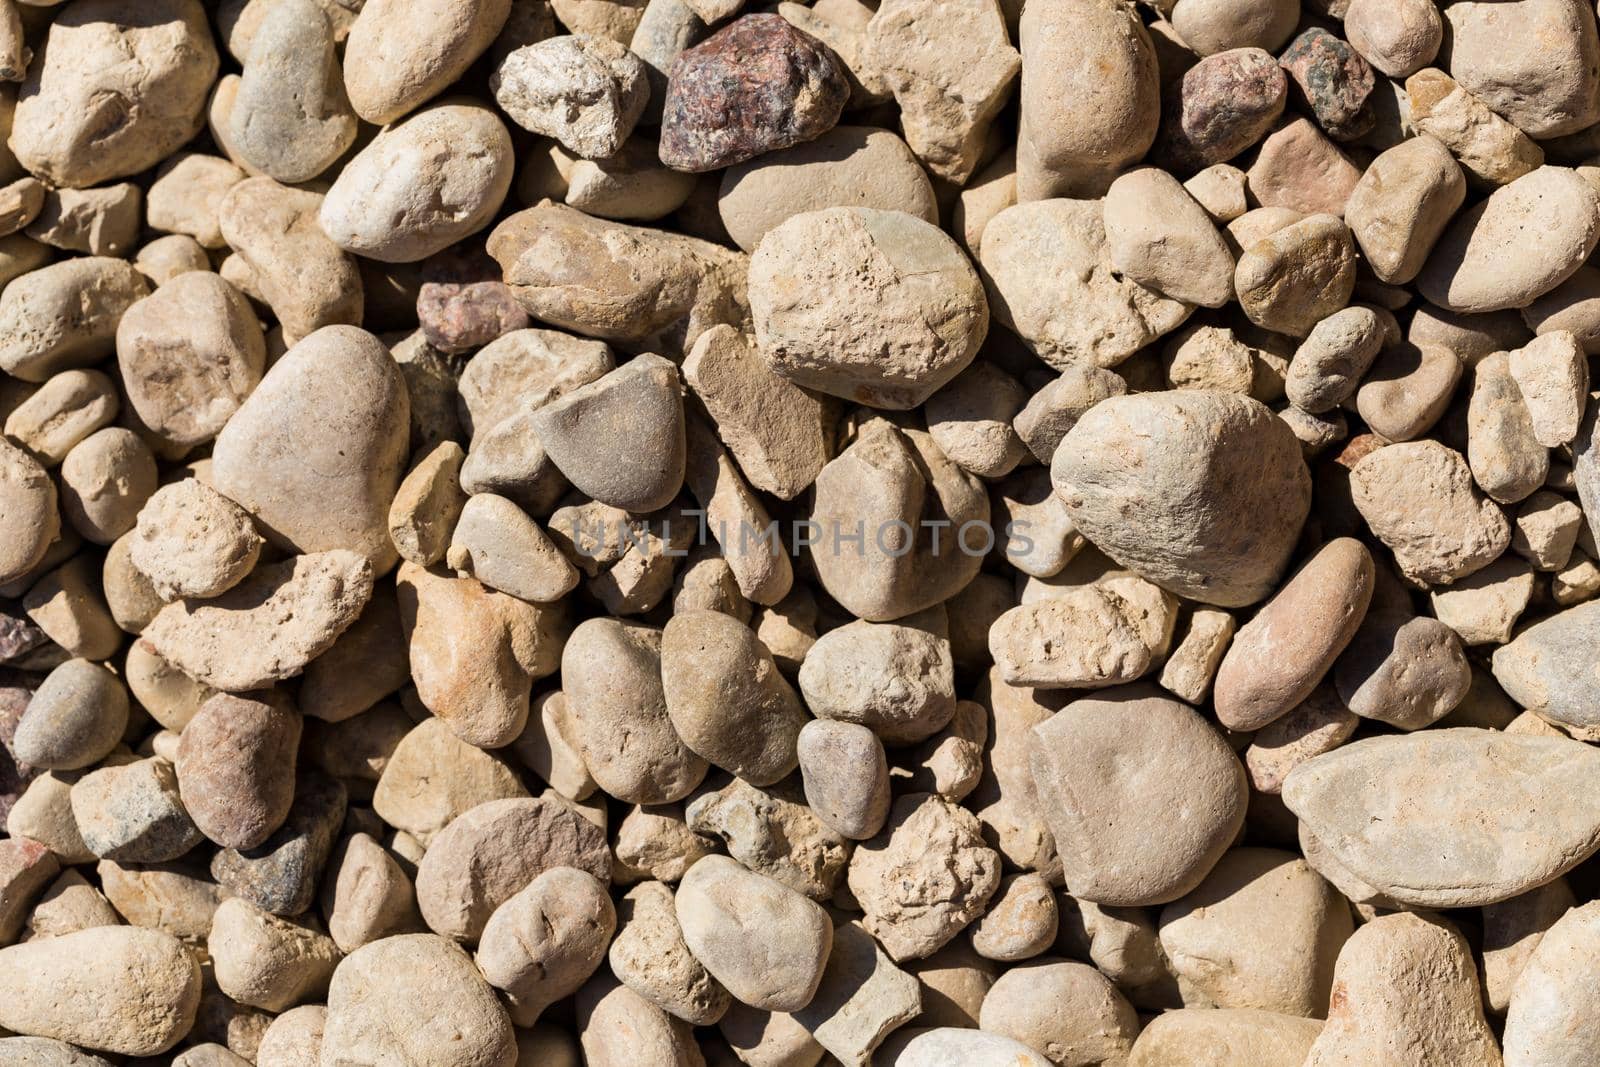 Stone Pebbles Texture Or Stone Pebbles Background For Design by RTsubin